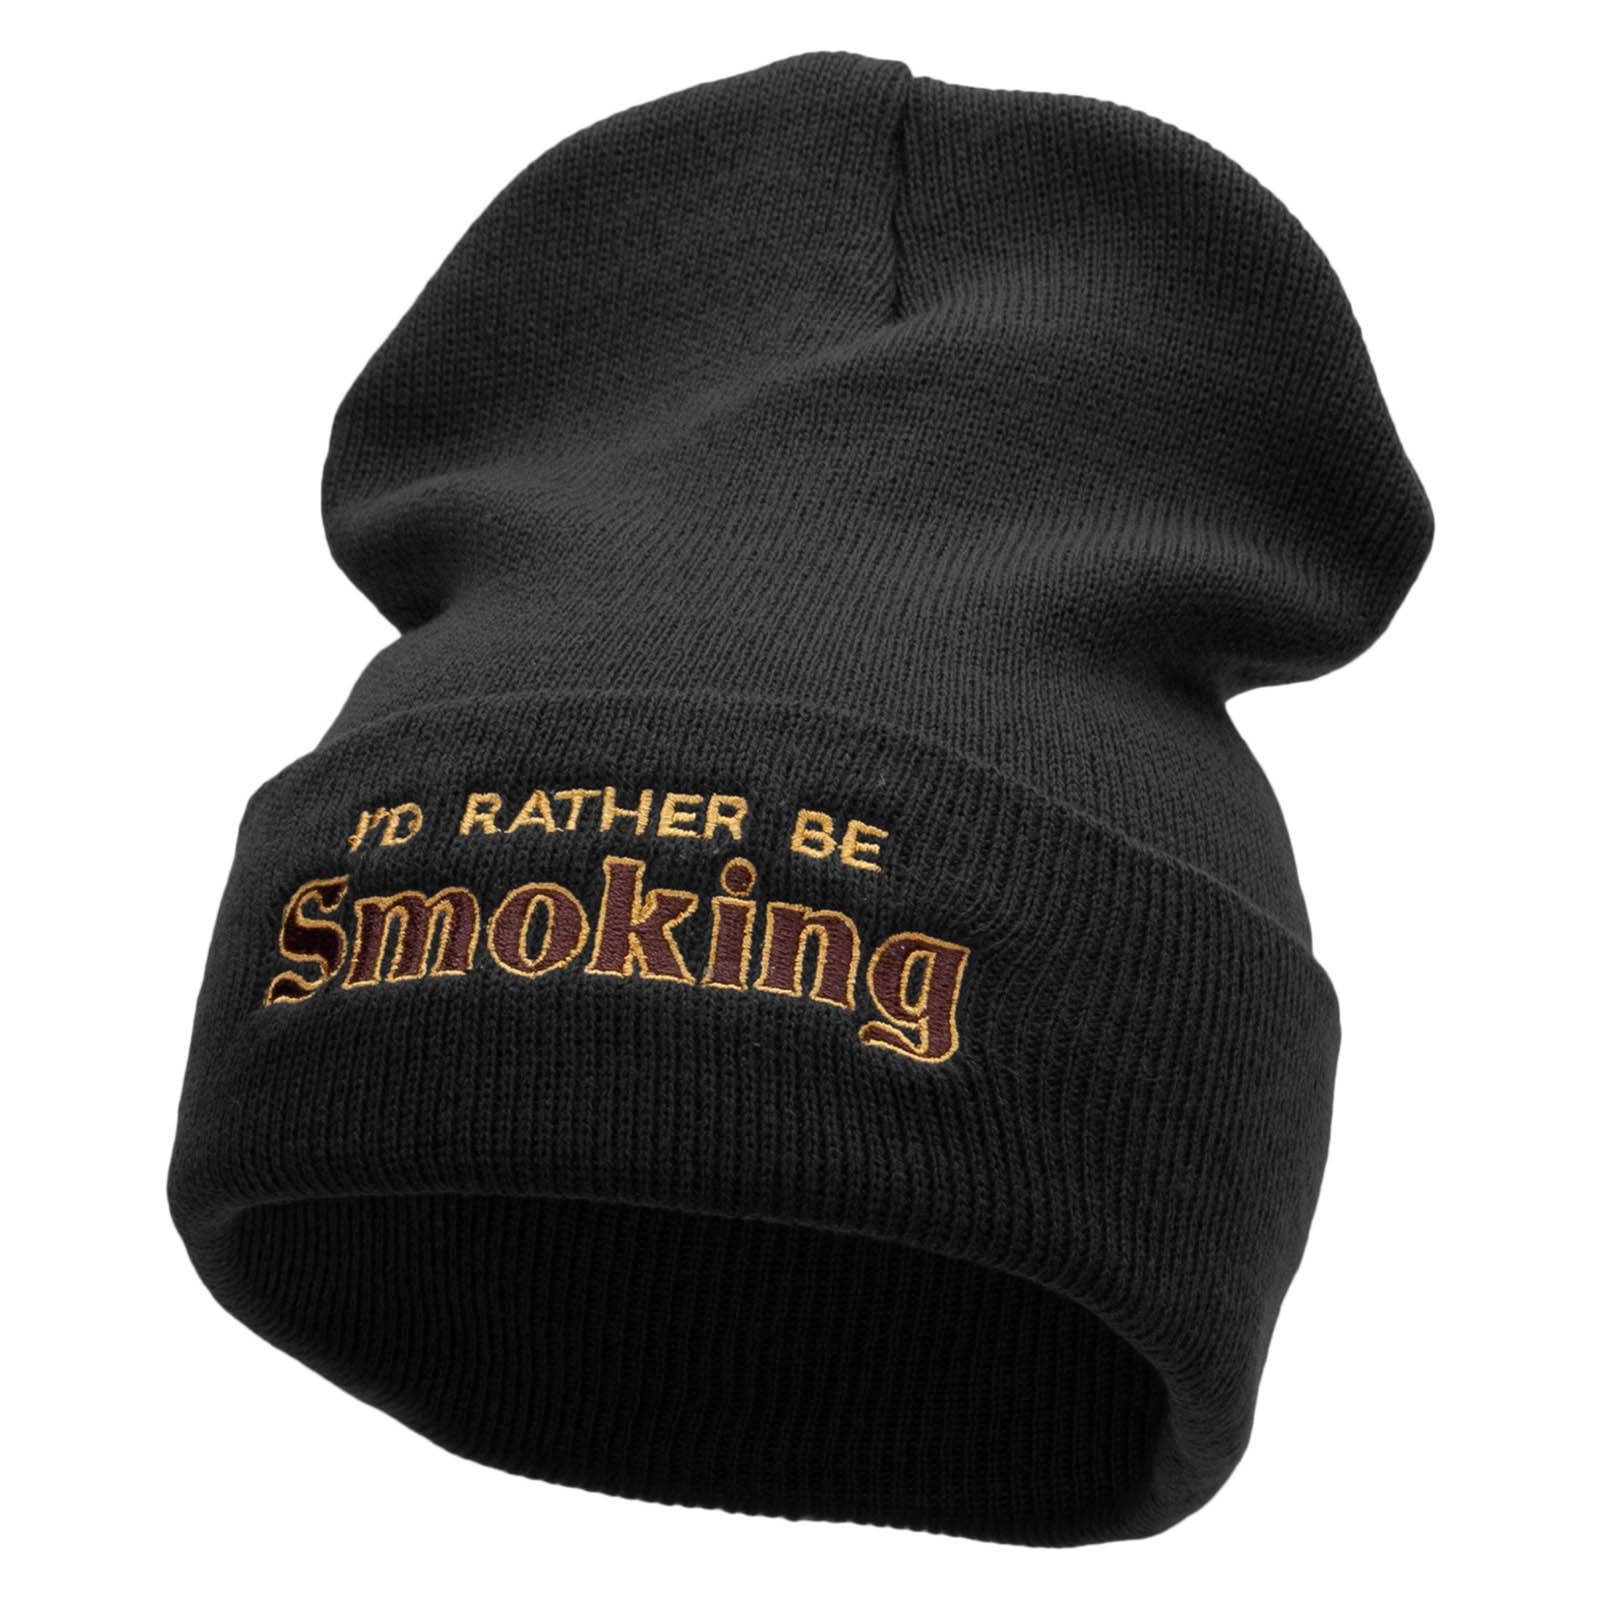 I&#039;d Rather Be Smoking Phrase Embroidered 12 Inch Solid Long Beanie Made in USA - Black OSFM